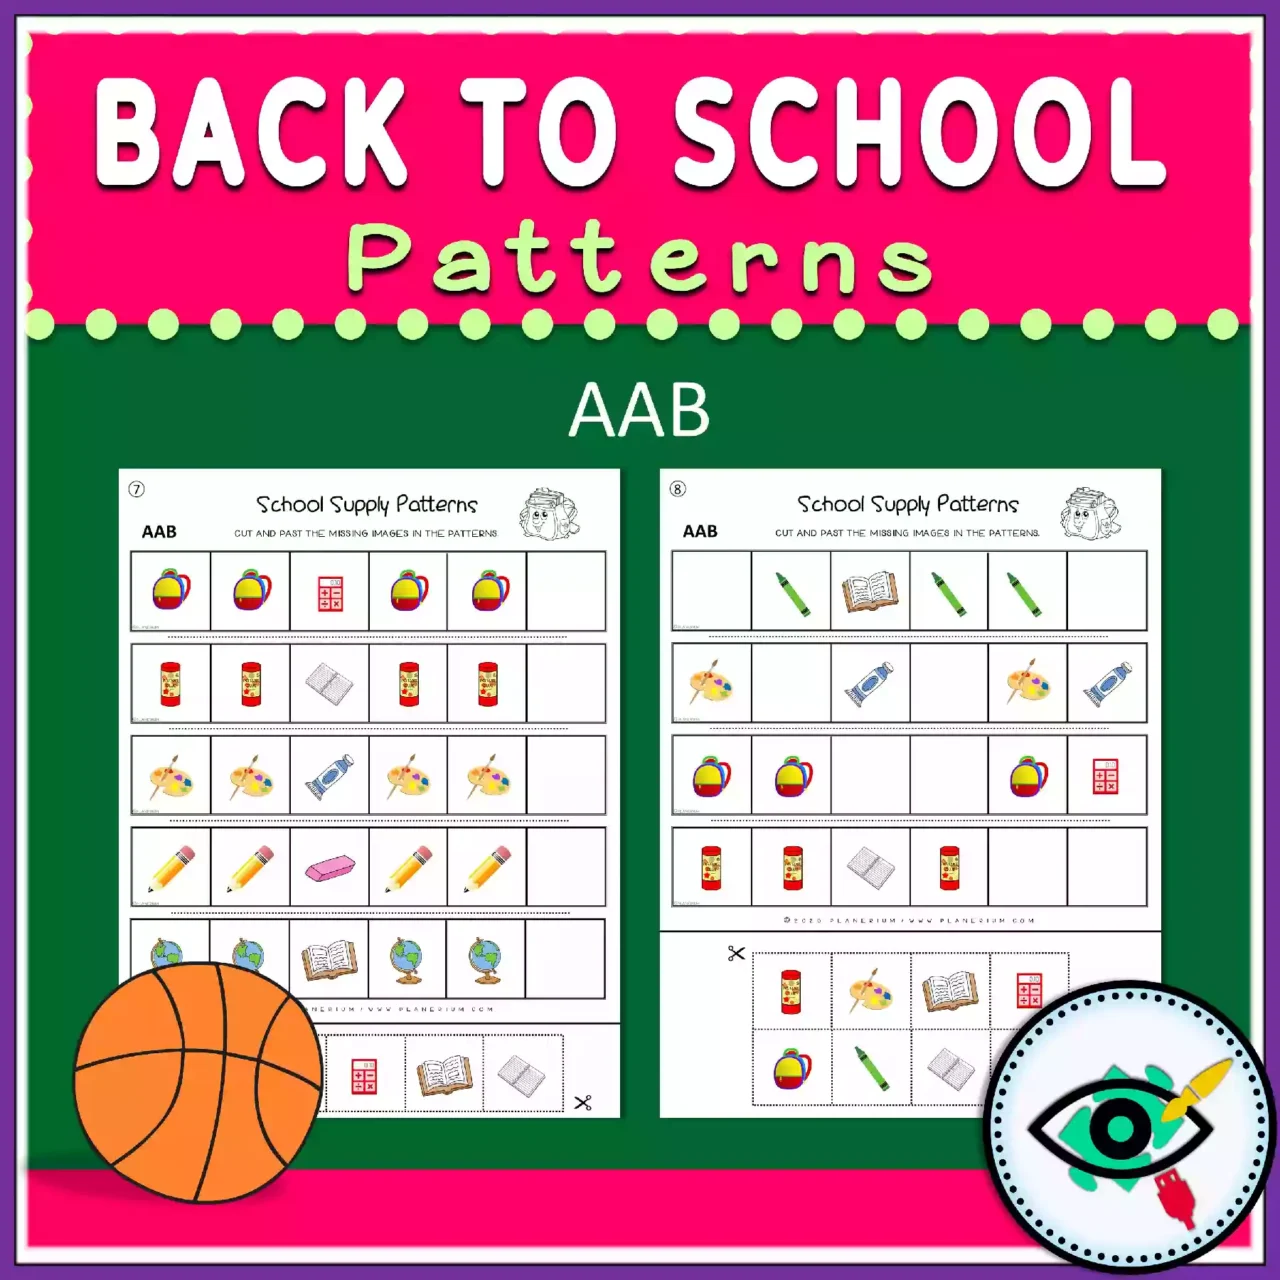 Back to School Patterns - Featured 5